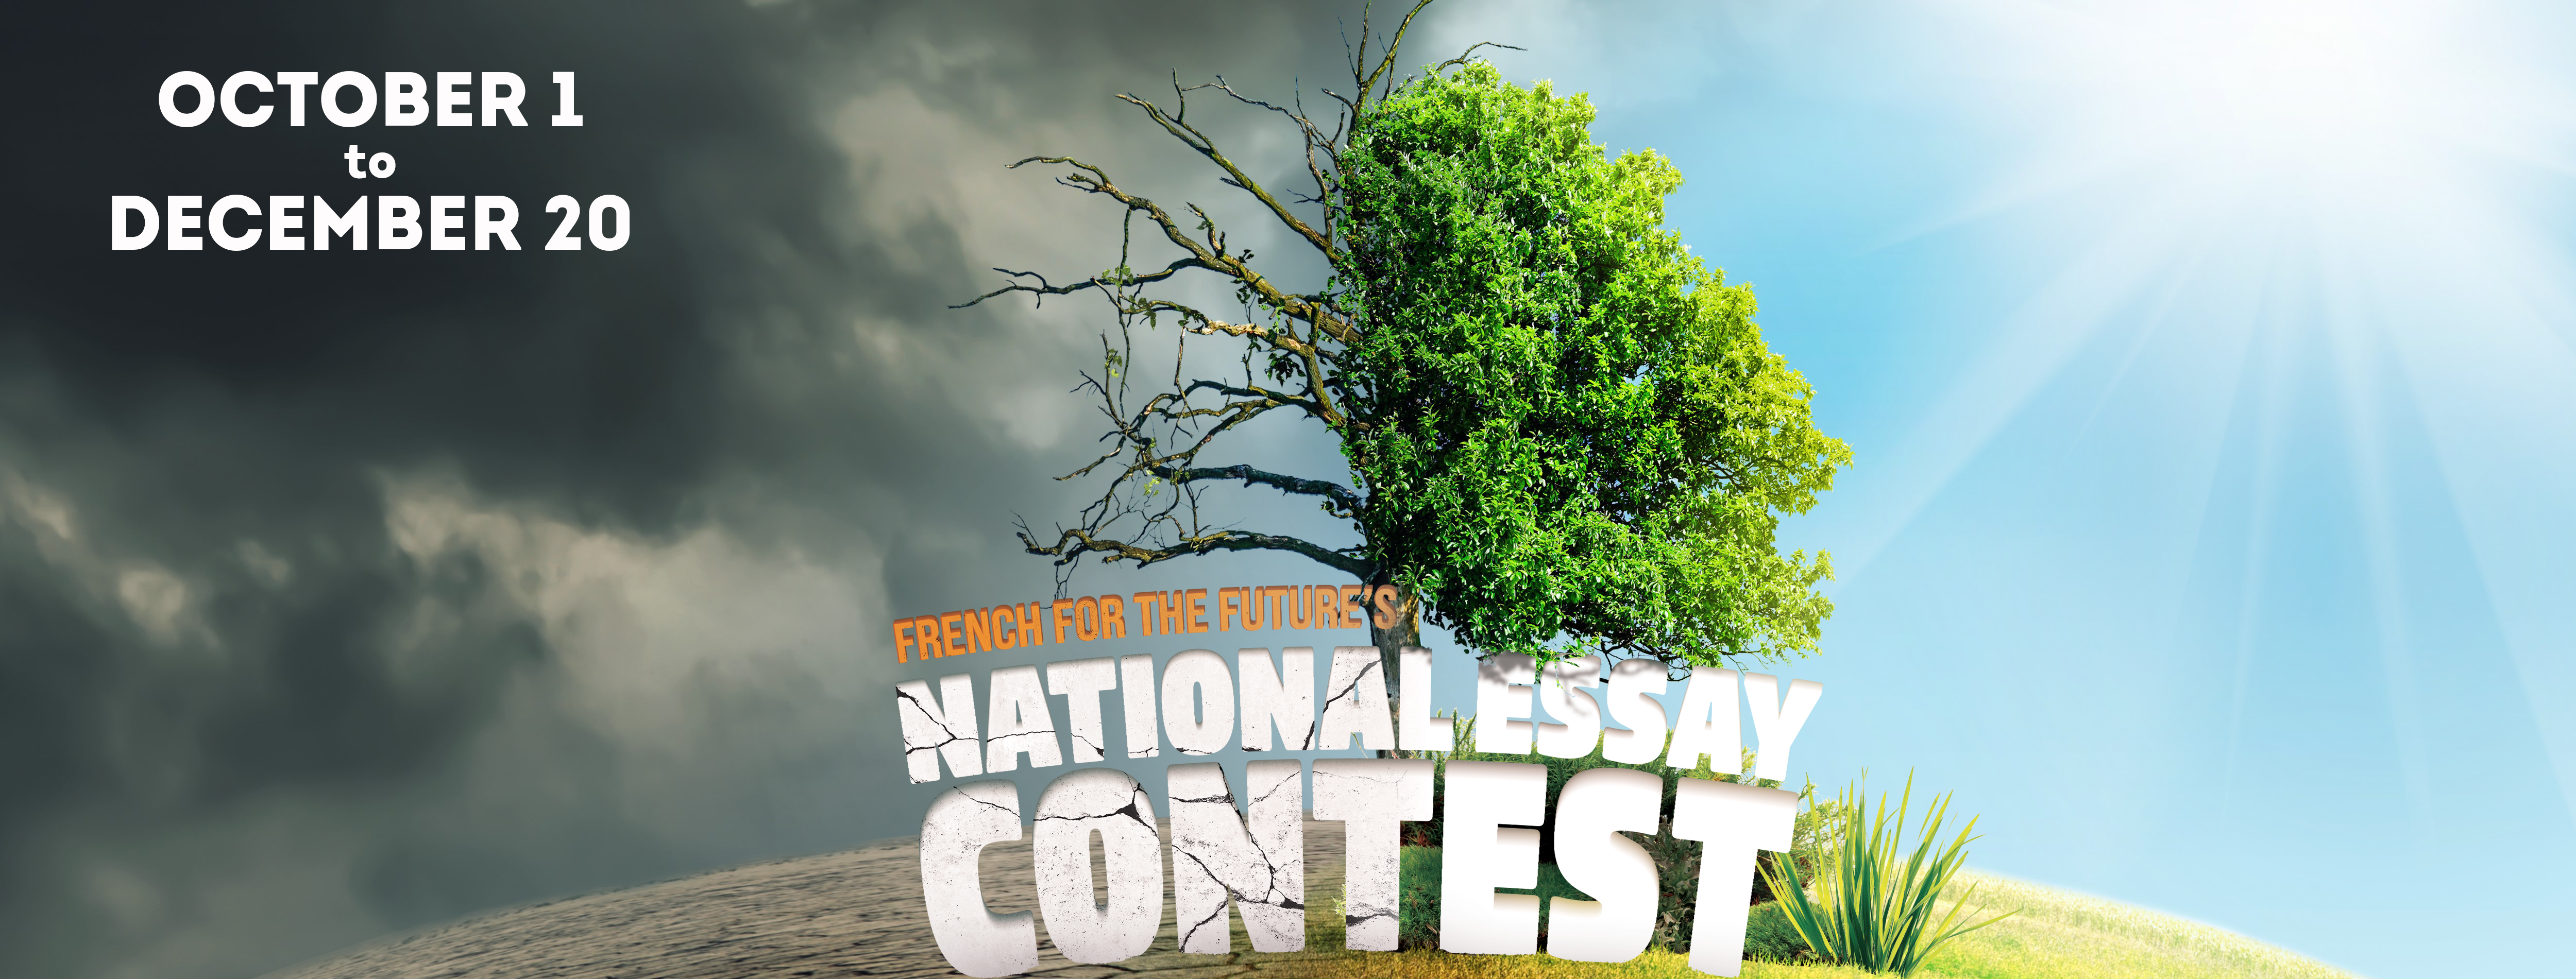 national essay contest french for the future